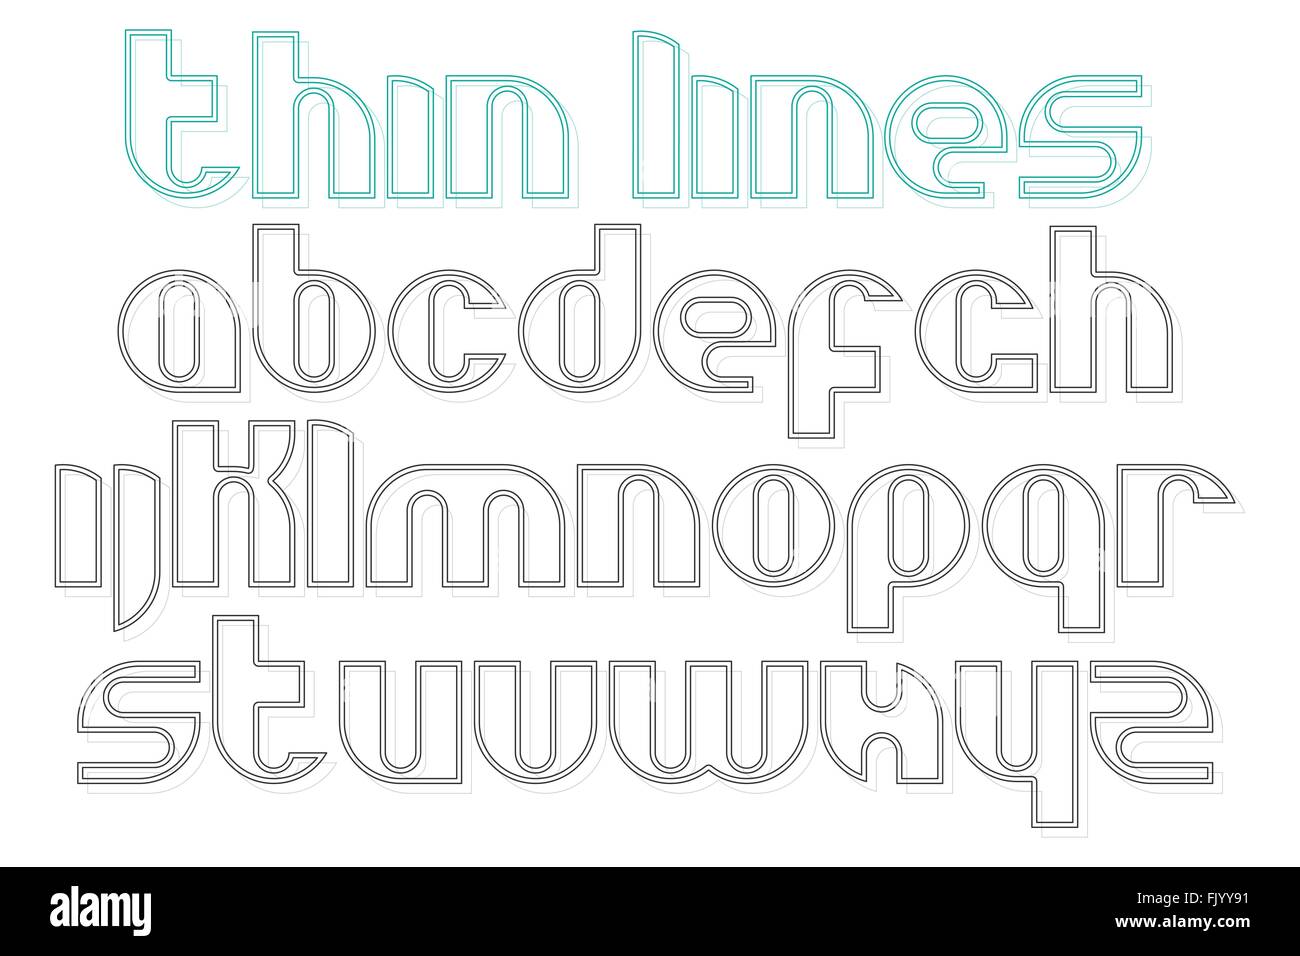 Typesetting Stock Vector Images - Alamy